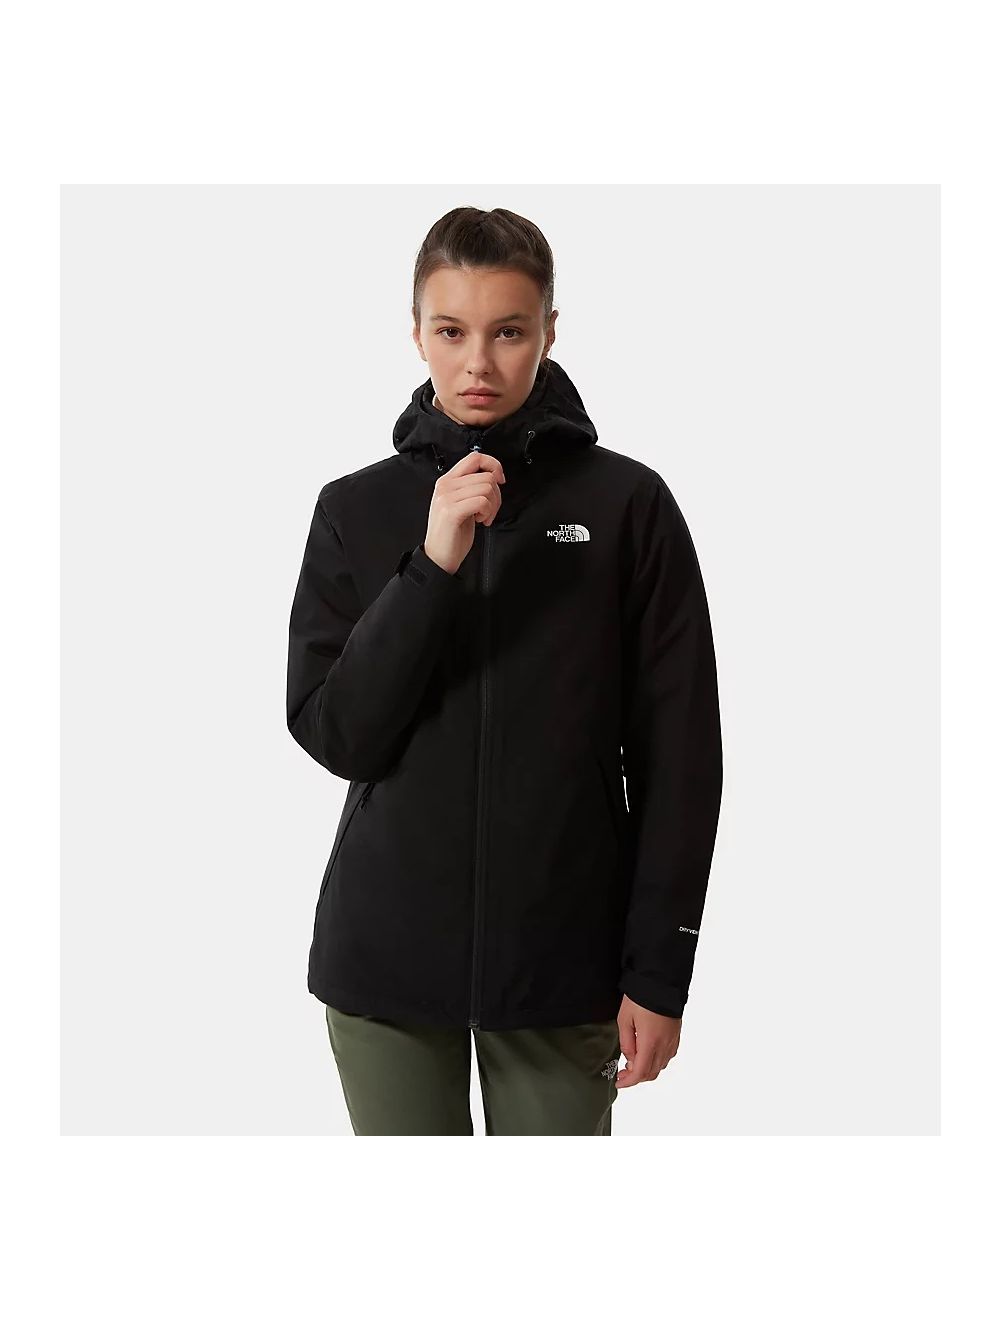 Taalkunde Promotie Kolonel The North Face W Carto Triclimate Jacket | Waterdichte 3 in 1 jas voor dames